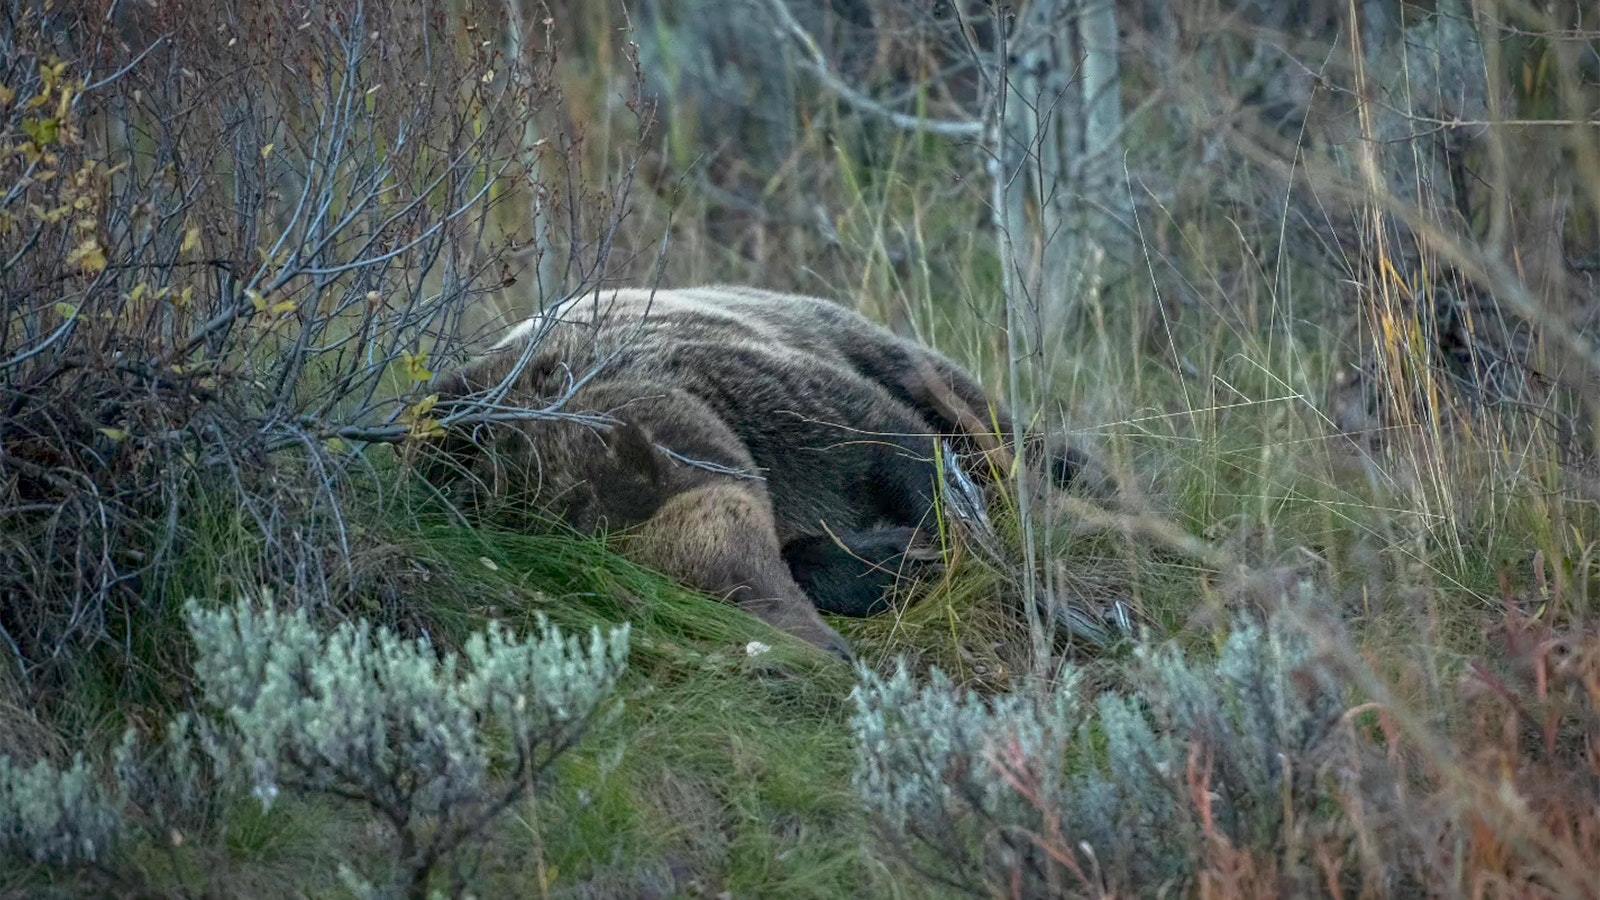 After being struck by a vehicle Monday afternoon along U.S. Highway 89 in Teton National Park, Wyoming’s beloved Grizzly 610 laid still for hours before finally rejoining her three yearling cubs. She was reported to be up and moving normally early Tuesday.